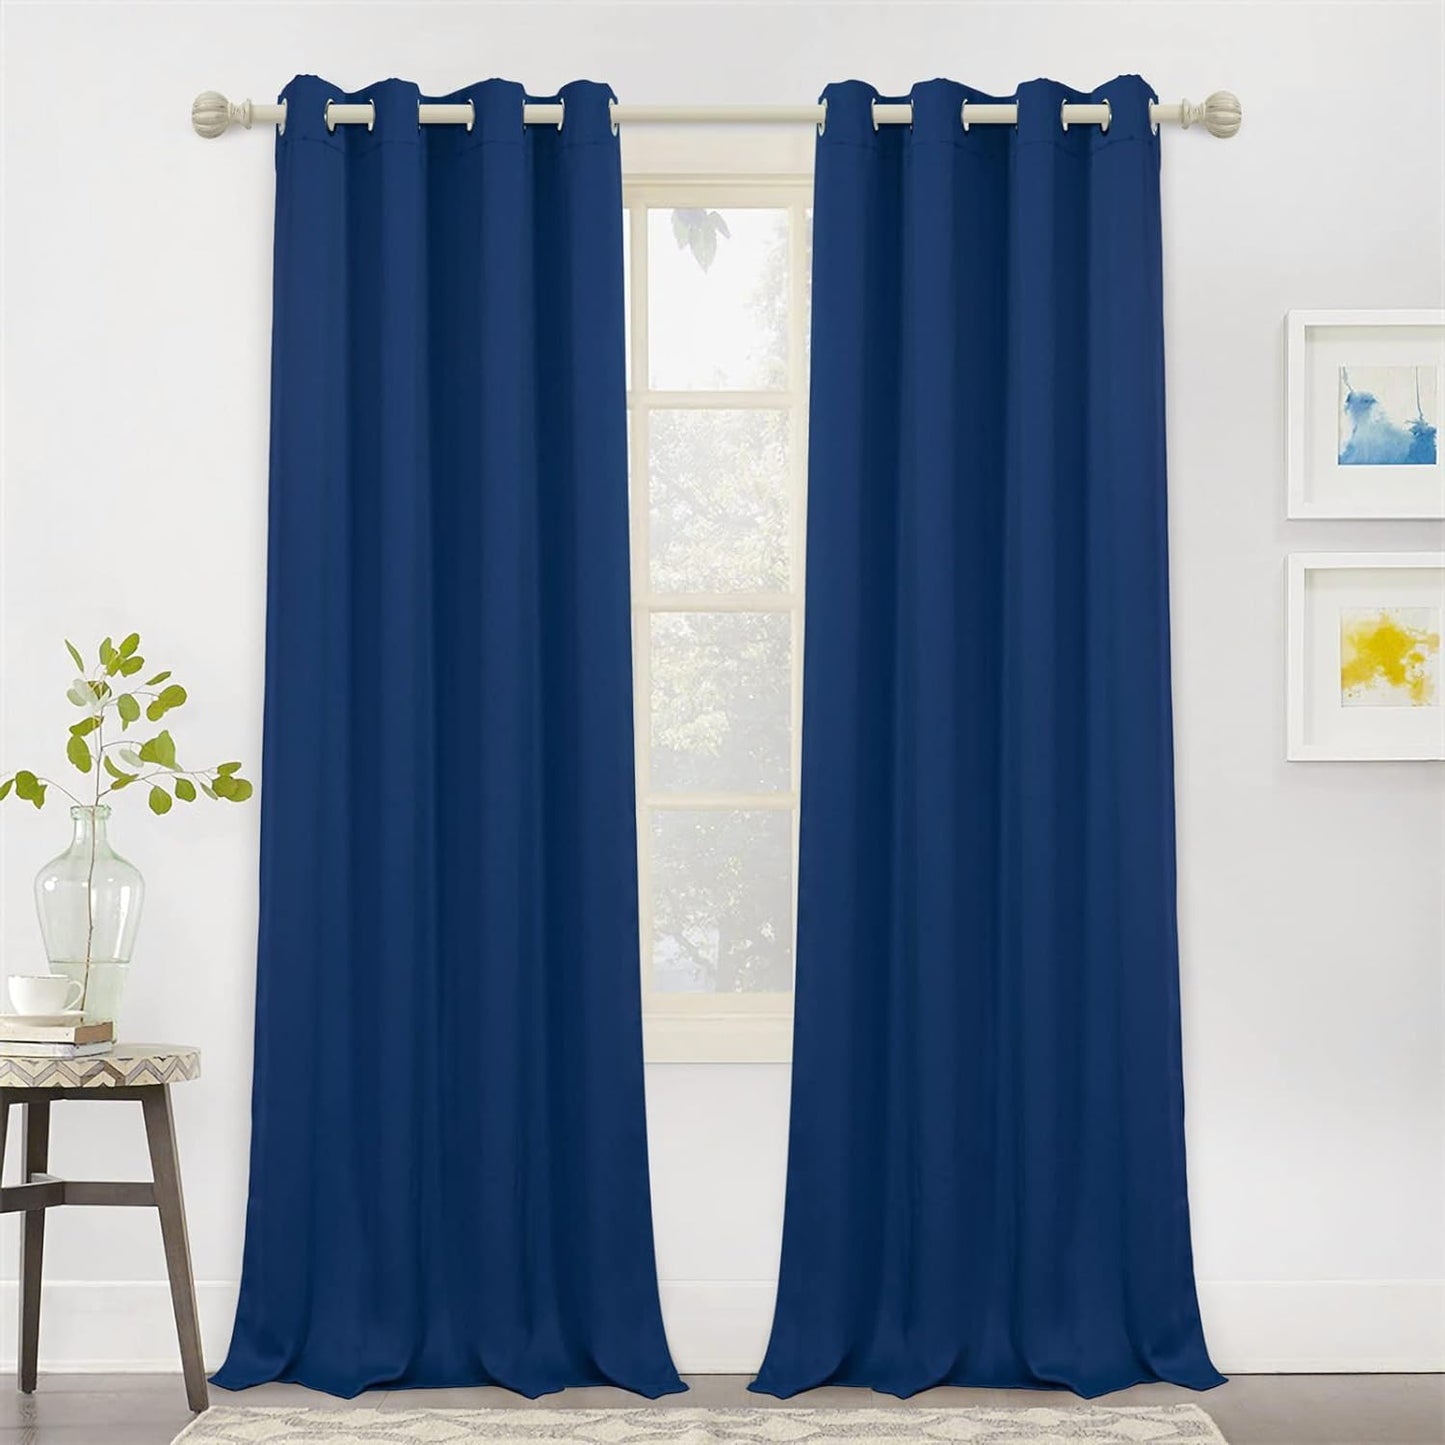 MYSKY HOME Black Curtains for Bedroom 90 Inch Long Blackout Curtains for Living Room 2 Panels Thermal Insulated Grommet Room Darkening Curtains Privacy Protect Window Drapes, 52 X 90 Inches, Black  MYSKY HOME Navy Blue 52W X 95L 